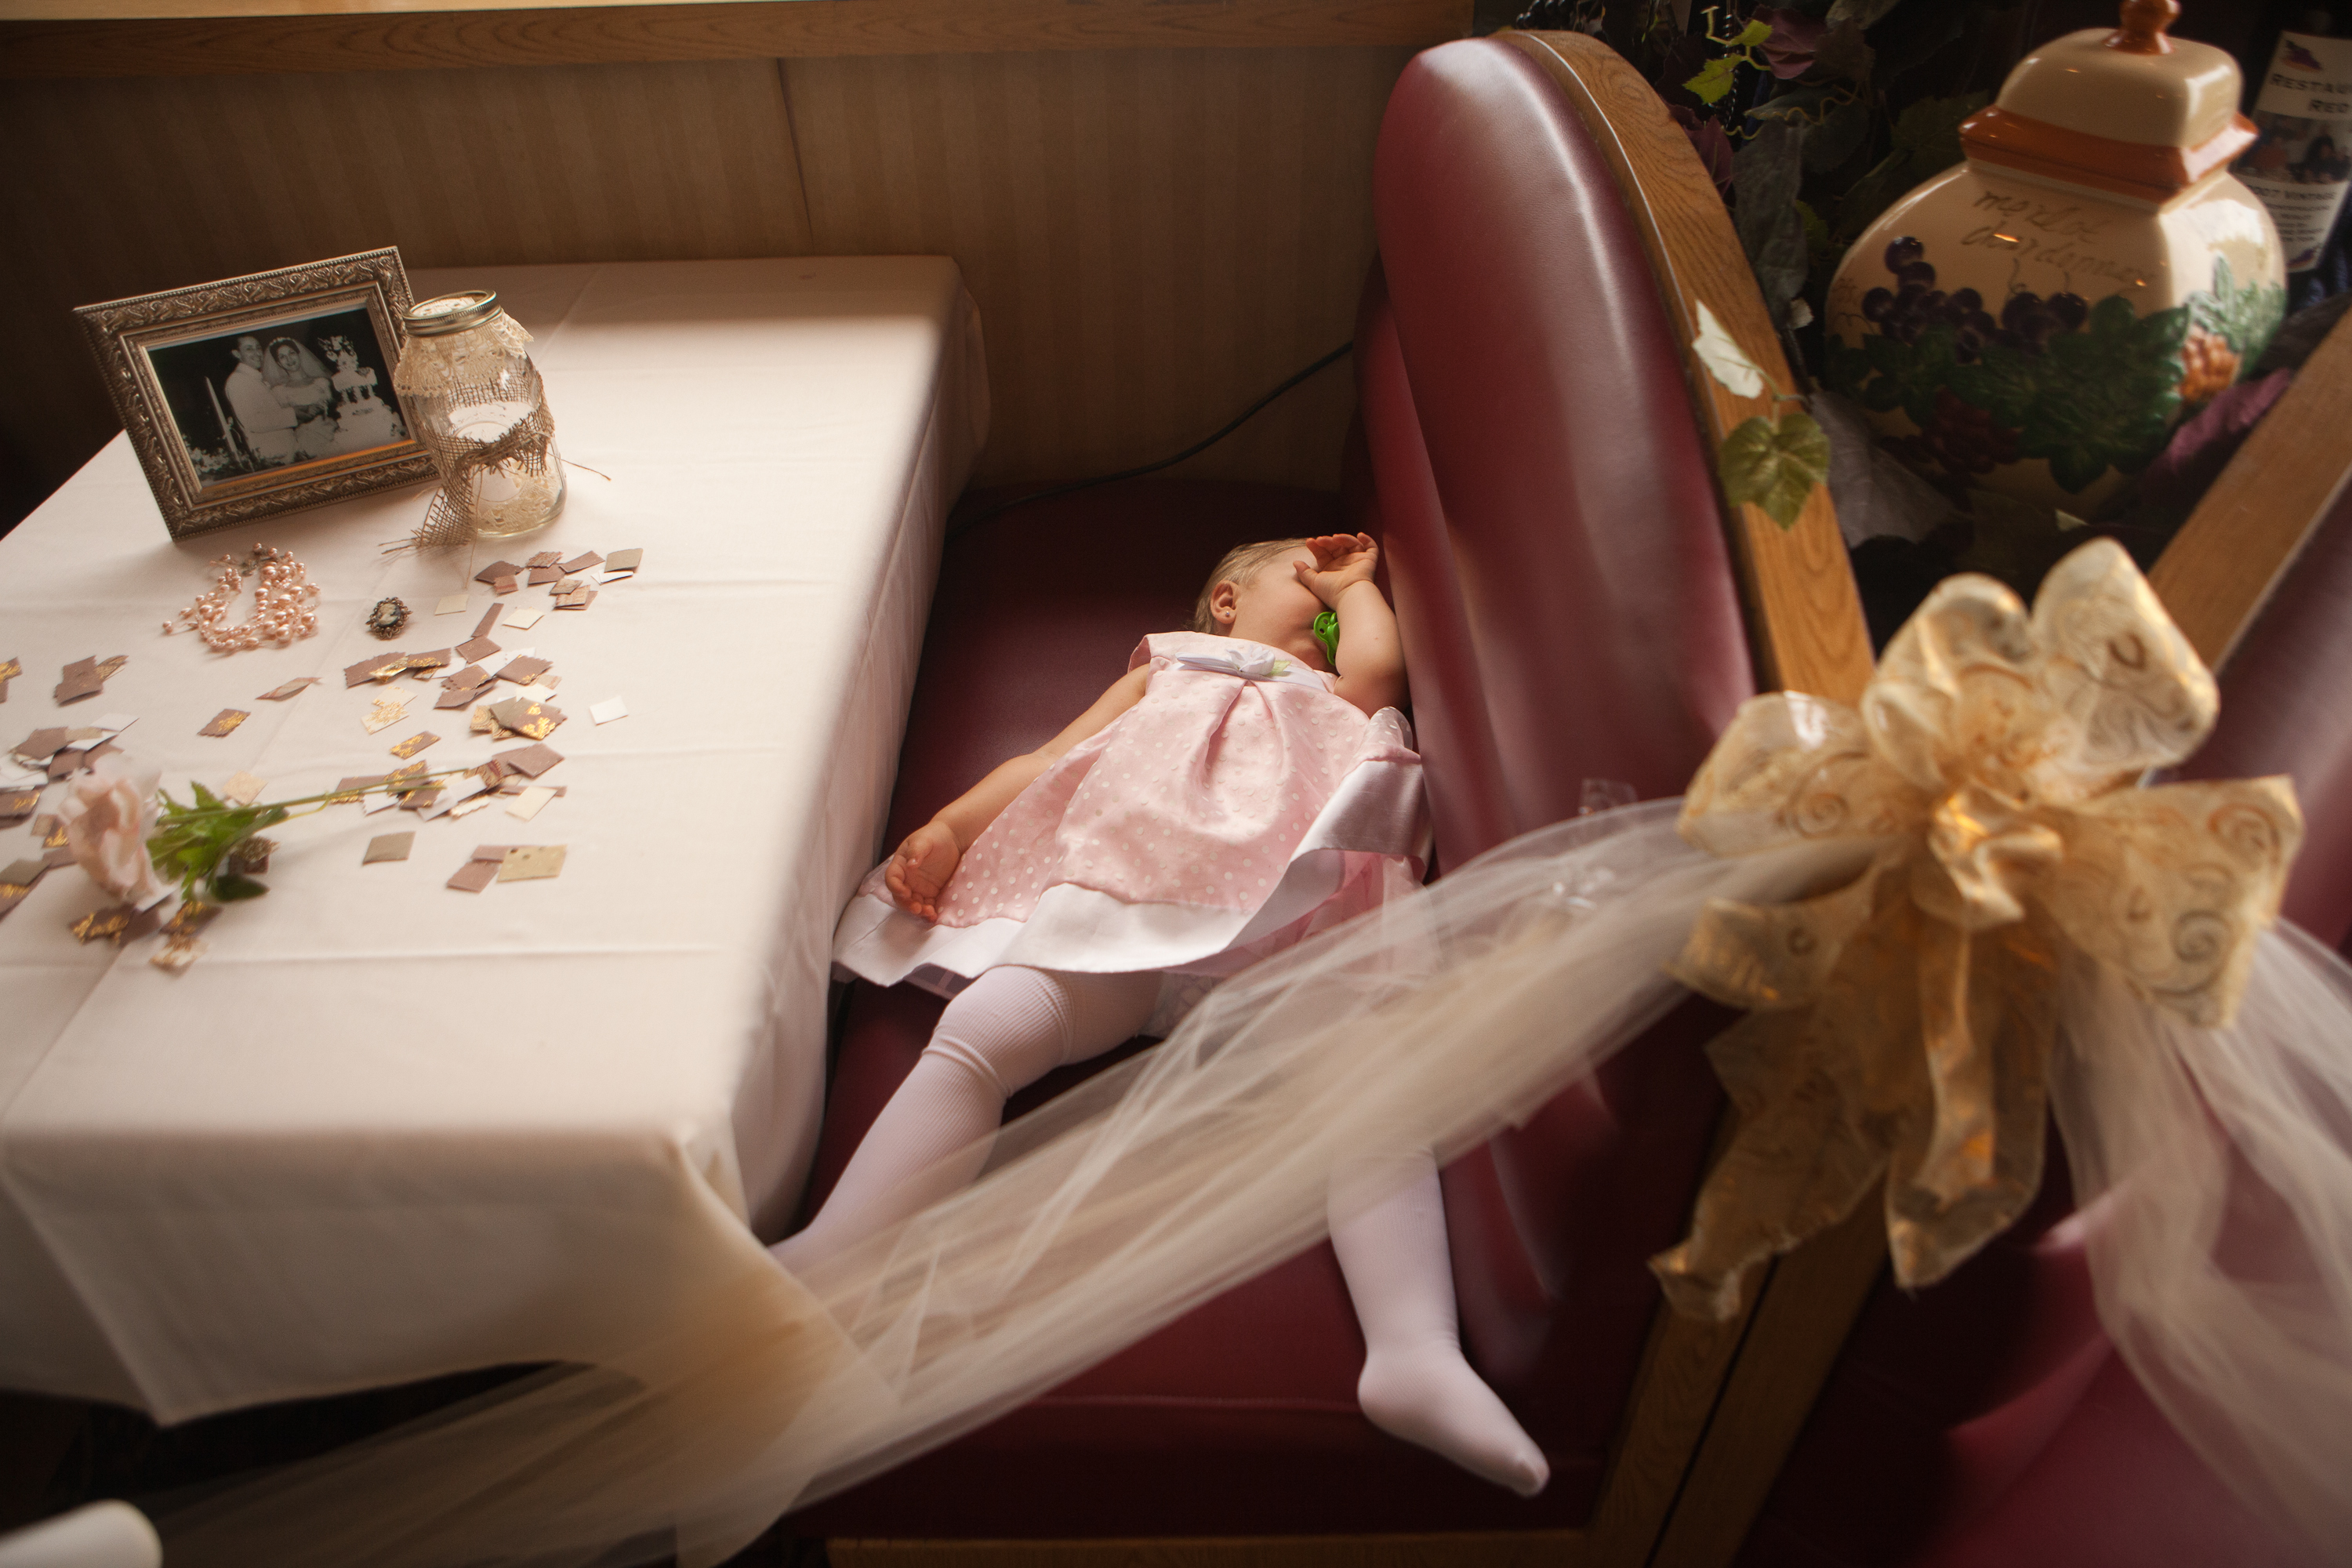 The daugter of a bridesmaid takes a nap during Valerie Coccia's bridal shower at Red Fedele's Brook House in Greece, NY on Saturday July 13, 2013.